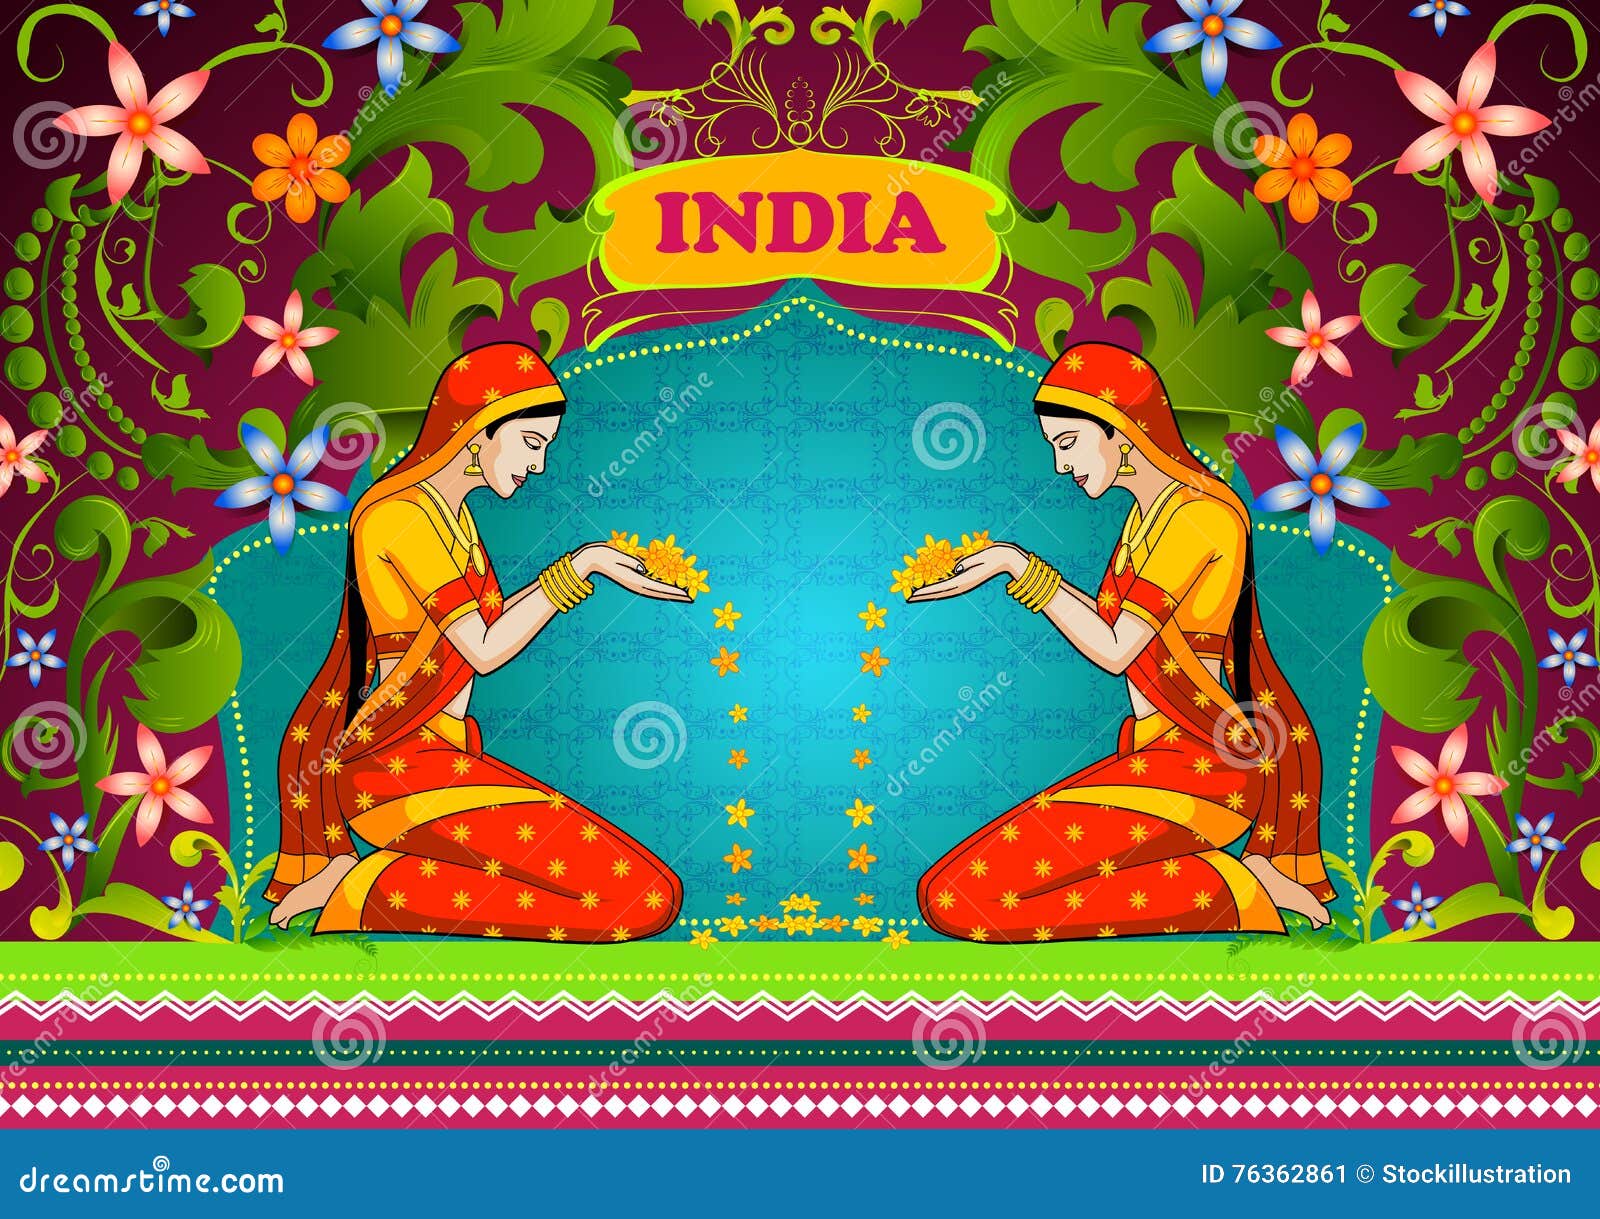 Floral Background With Indian Woman Welcoming Flower Showing Incredible India Stock Vector